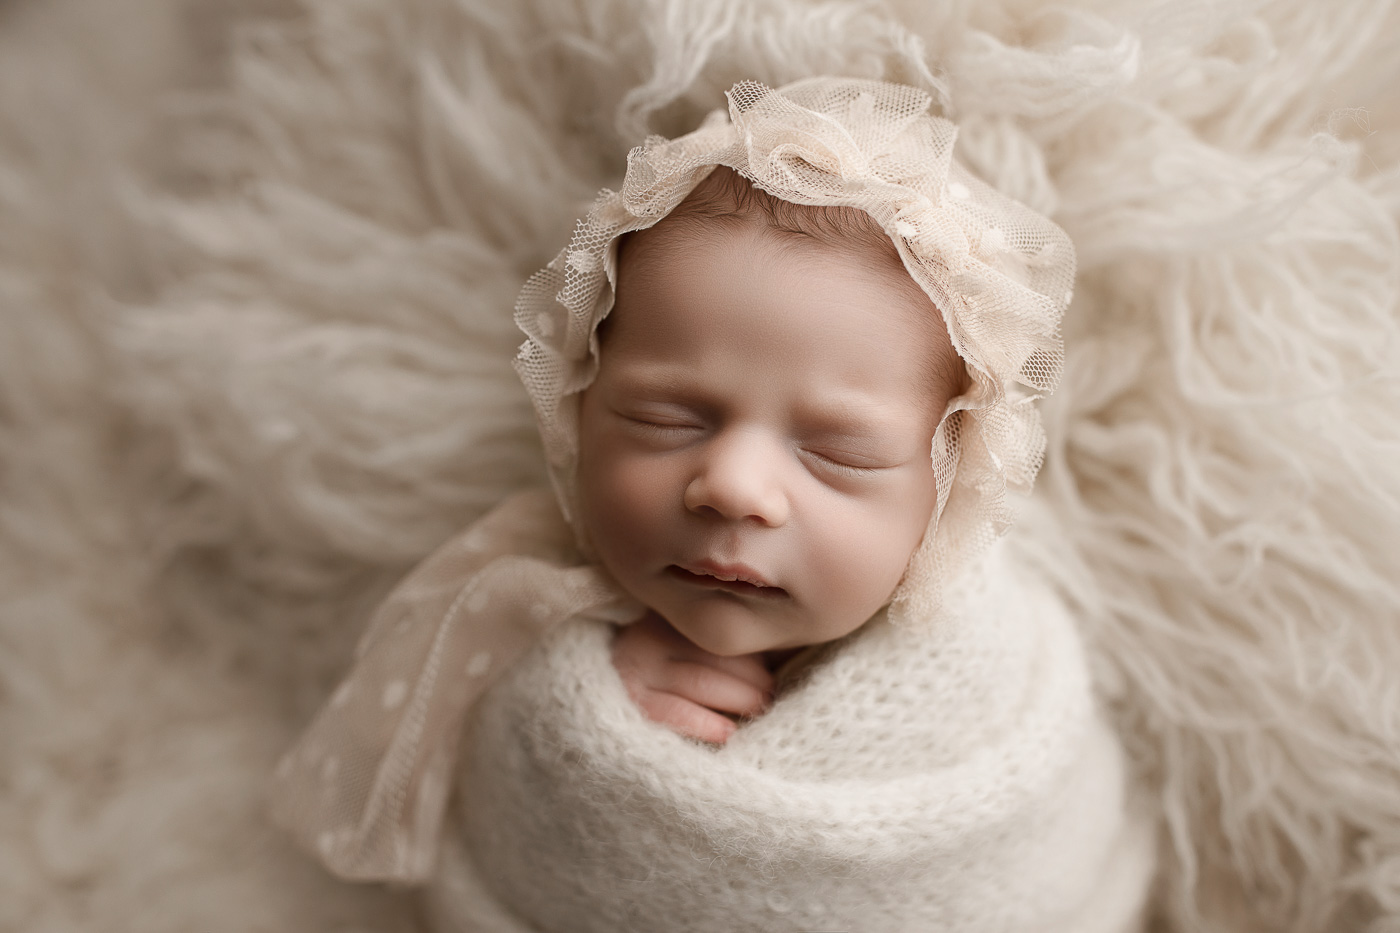 Pretty baby girl wearing a cute bonnet during her studio newborn session.